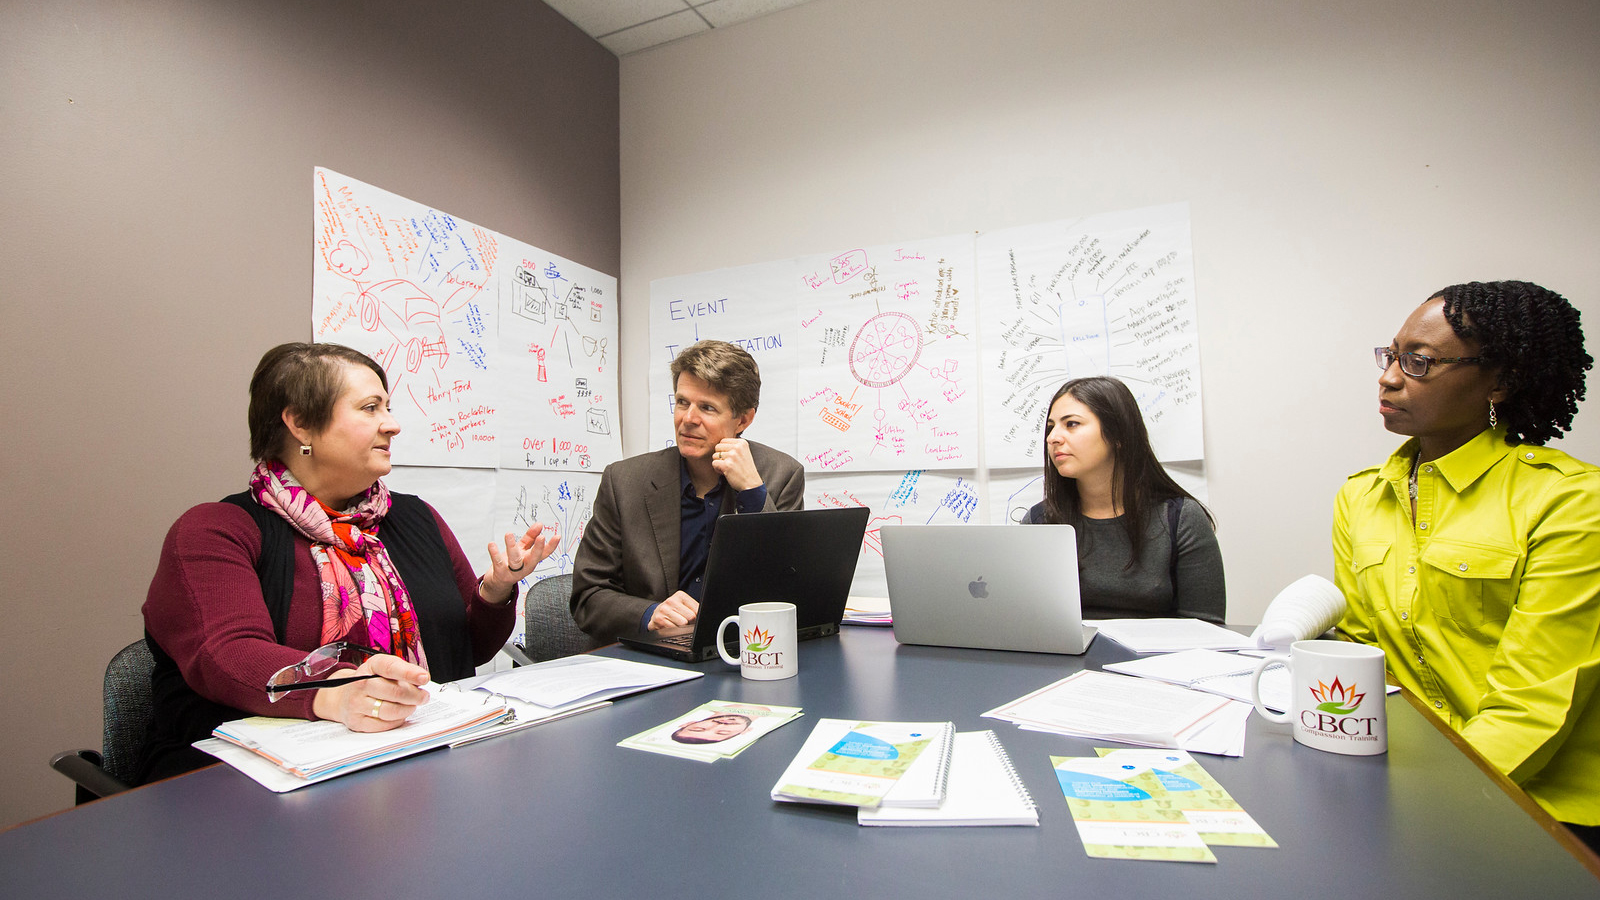 faculty sitting at a table in front of a whiteboard with colorful writing 